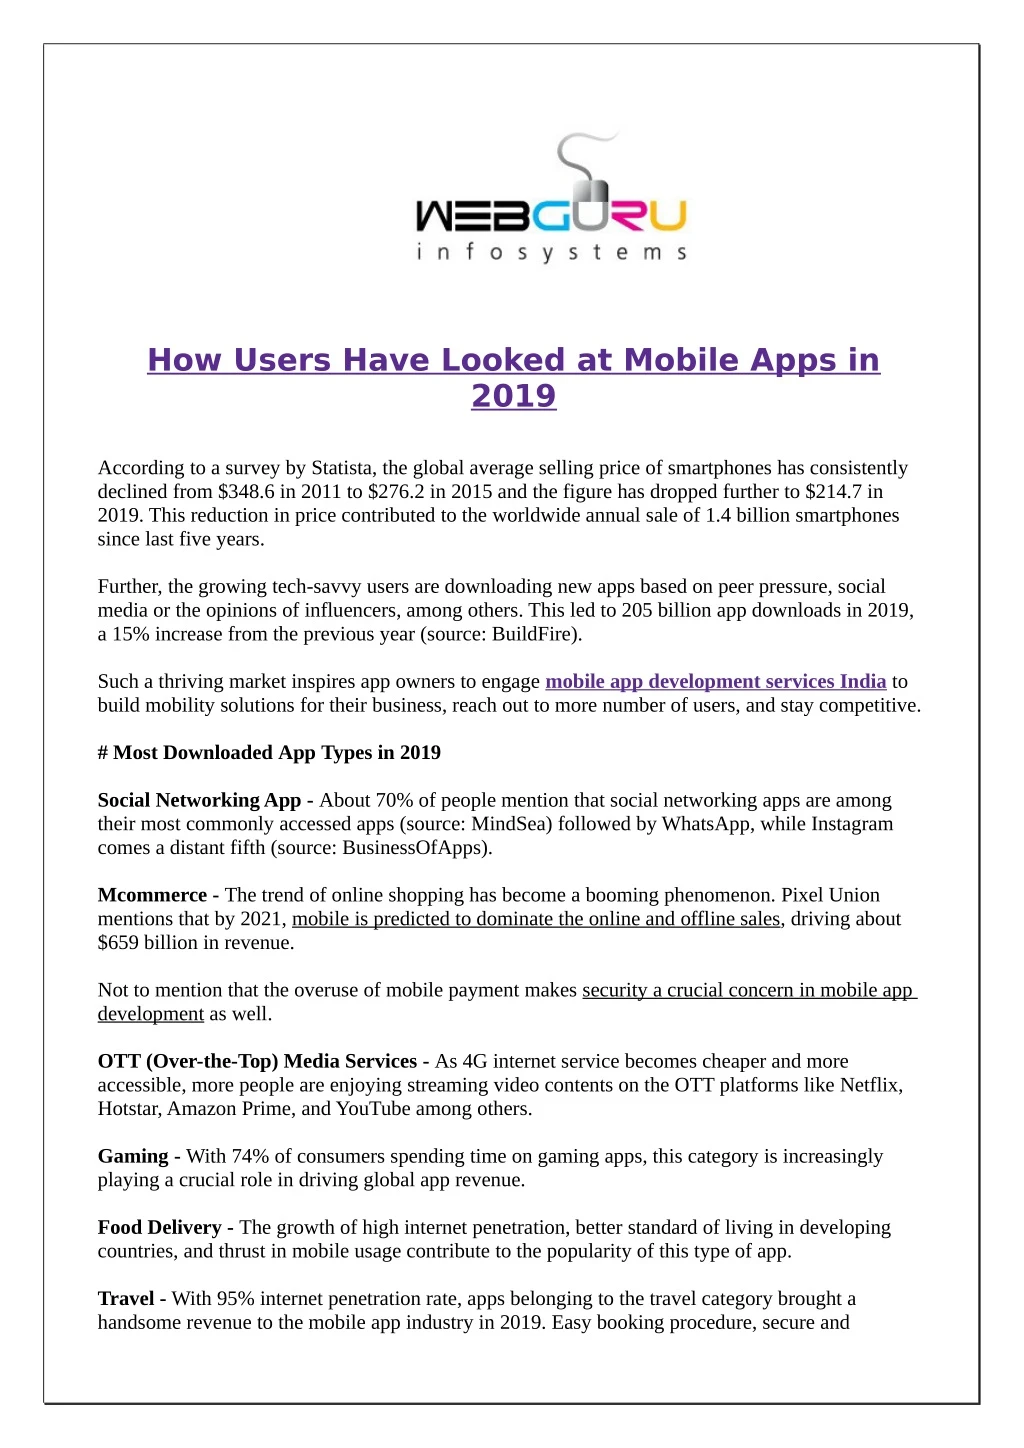 how users have looked at mobile apps in 2019